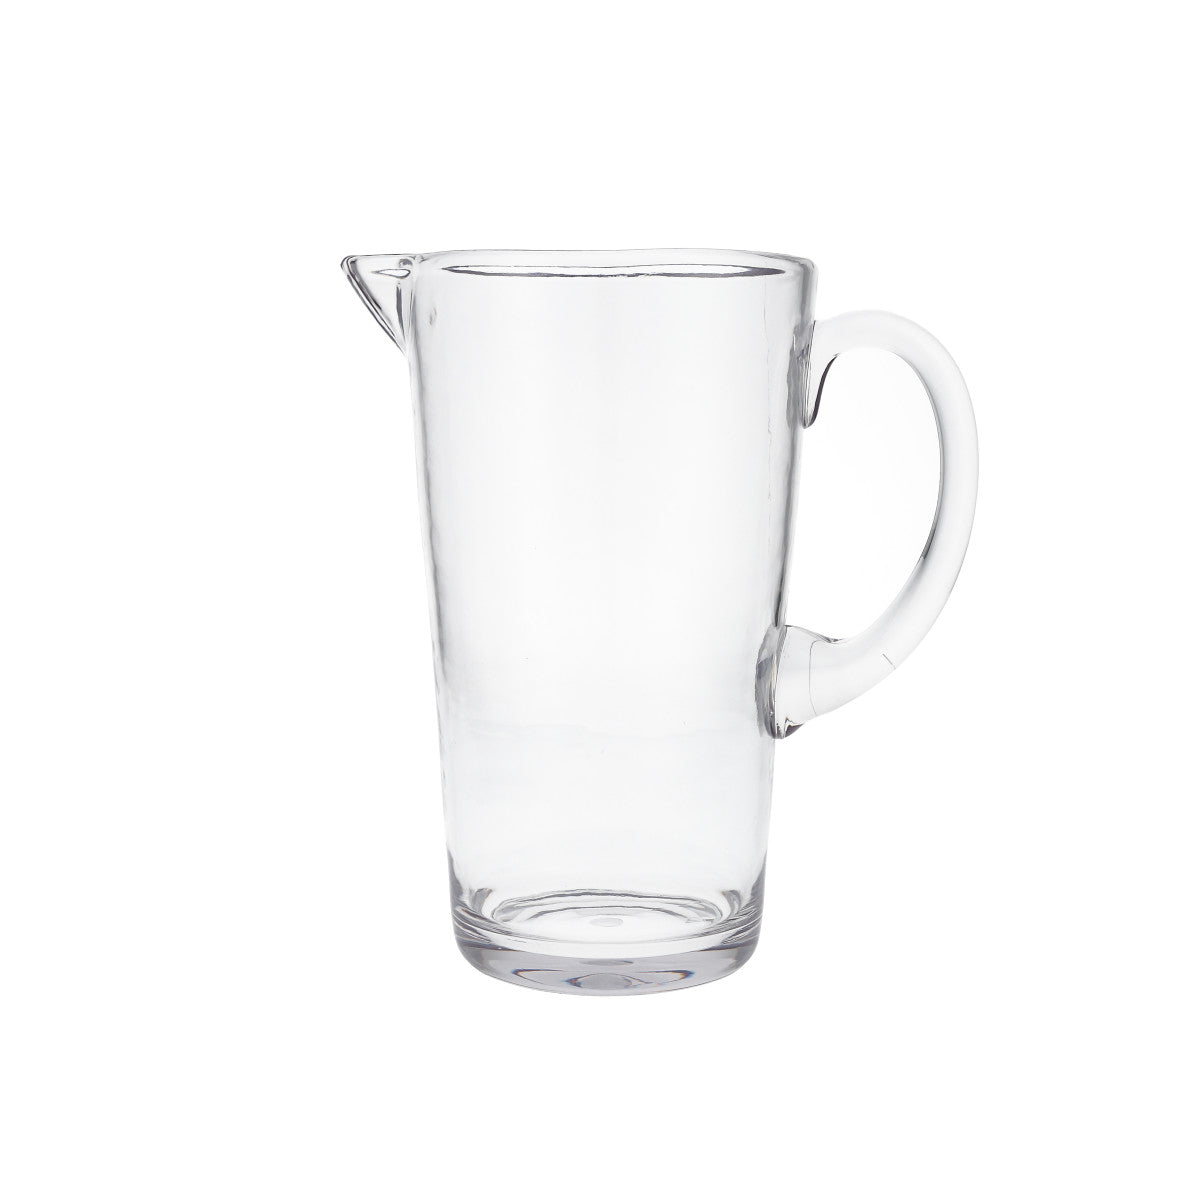 clear pitcher on white background.